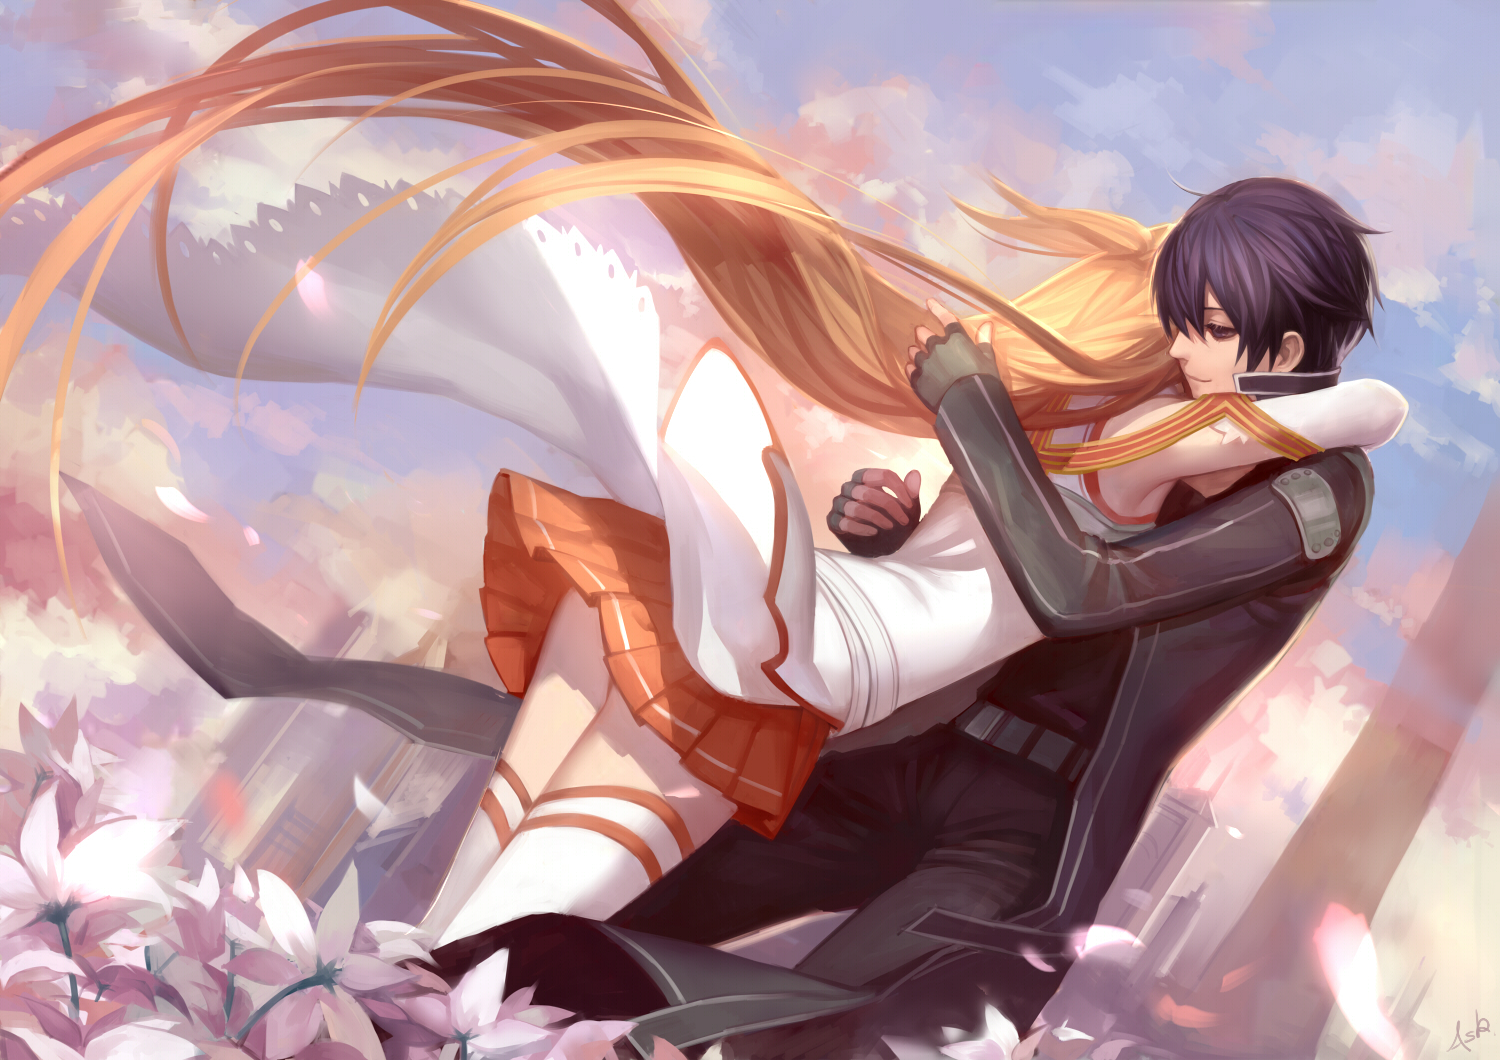 7. "Kirito and Asuna from Sword Art Online" - wide 4